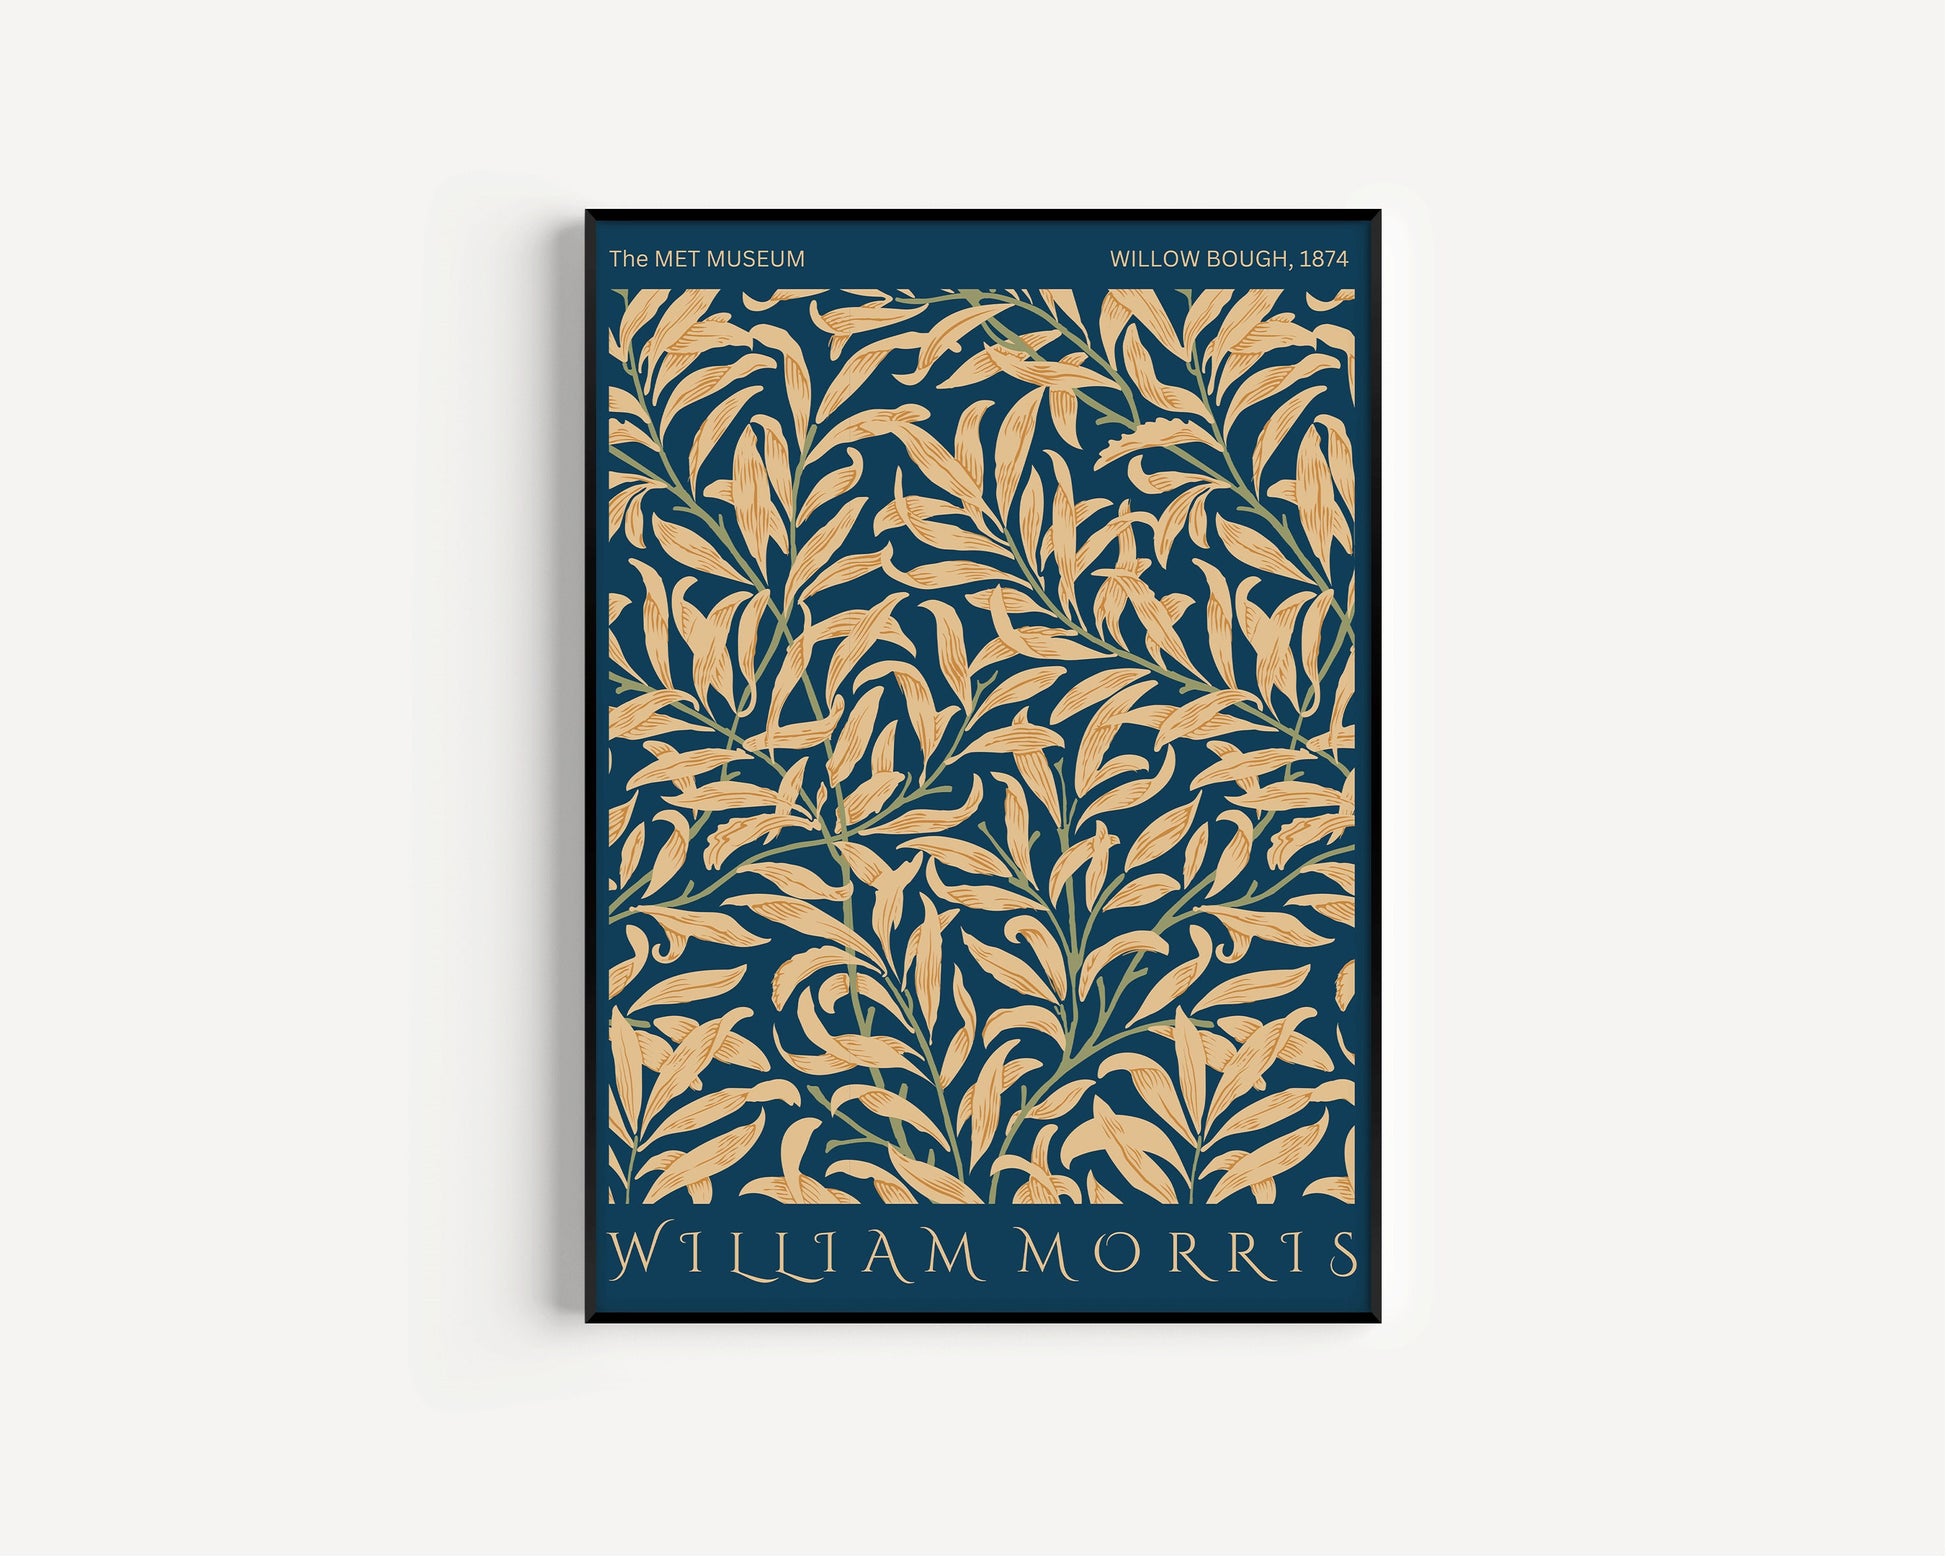 Framed William Morris Poster Navy Blue Gold Exhibition Art Print Nouveau Vintage Willow Bough Flower Market Museum Framed Ready to Hang Gift